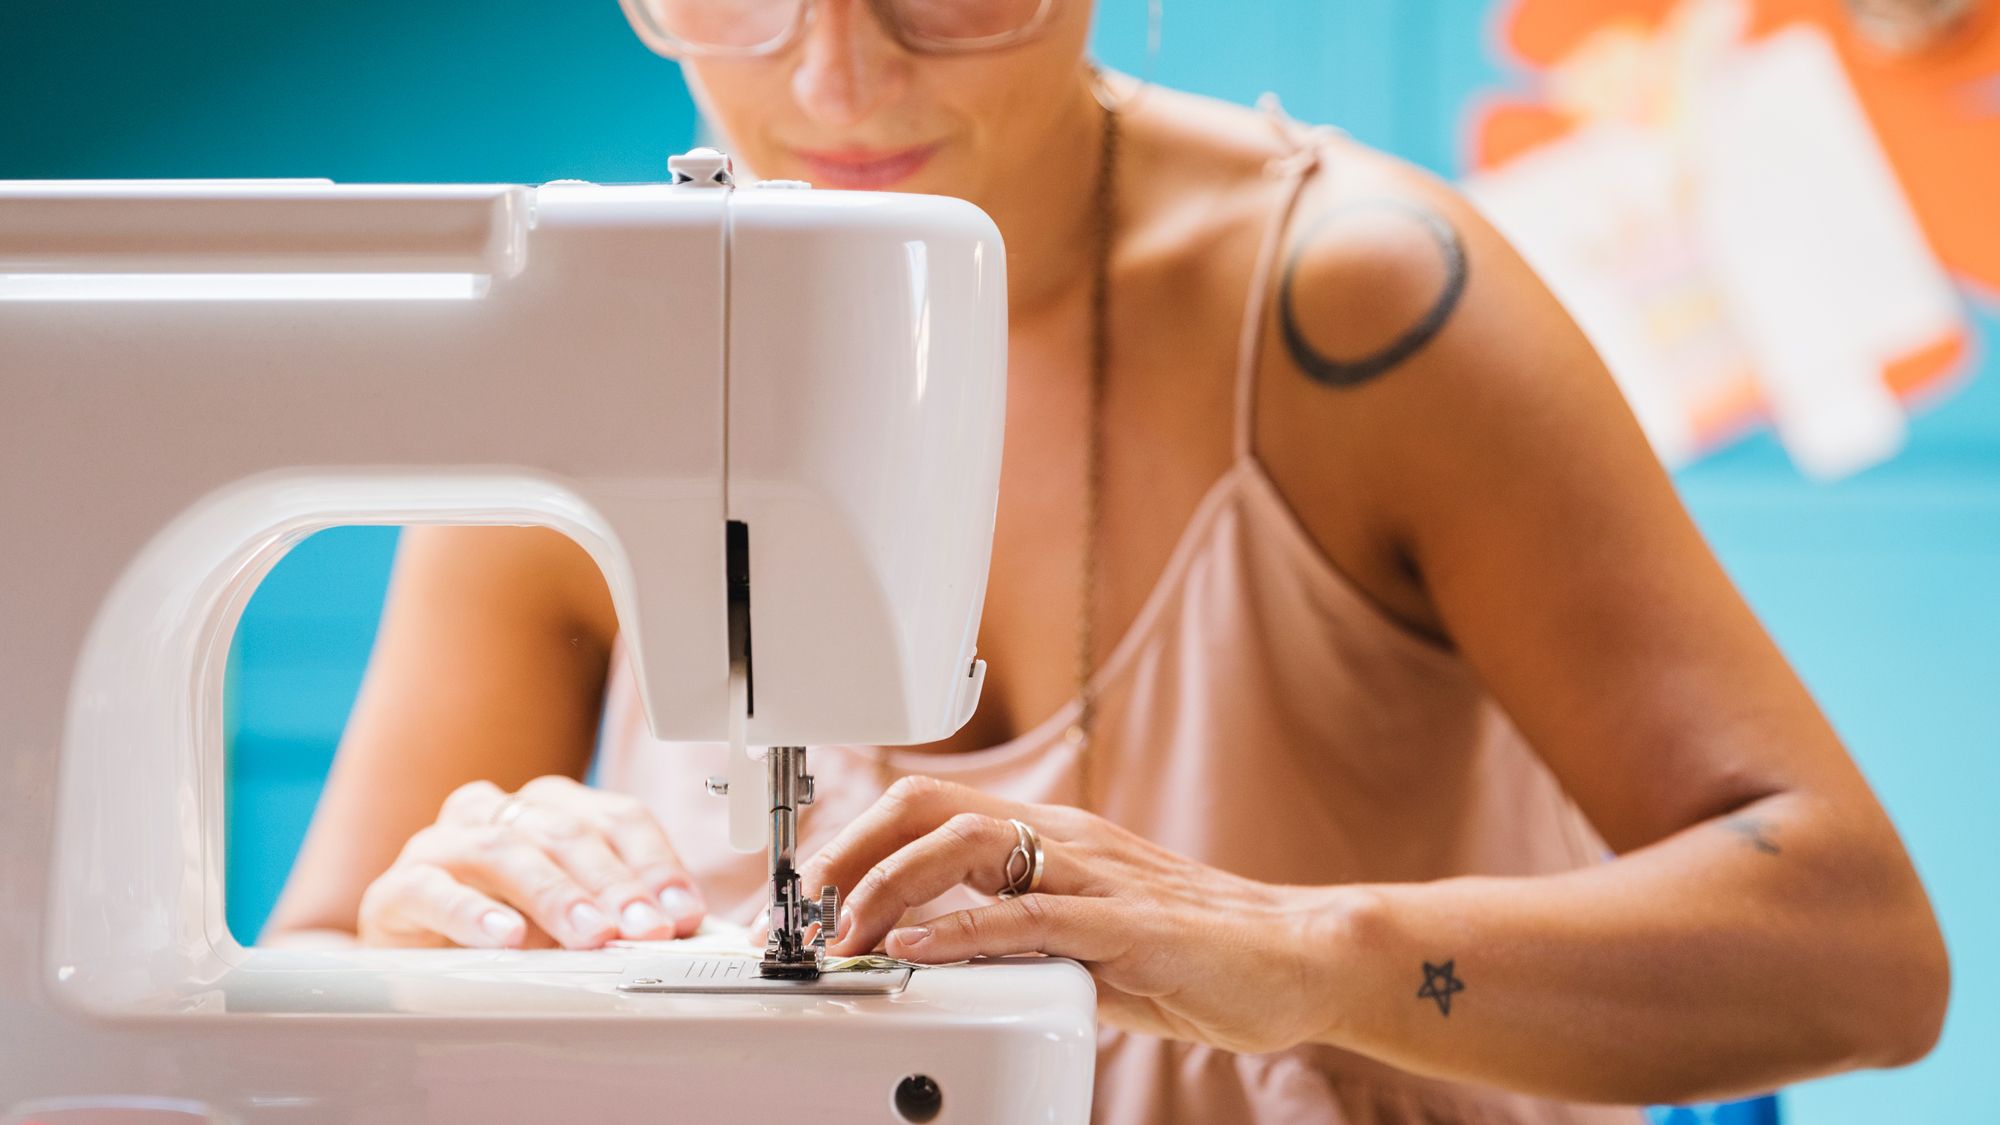 The Best Portable Sewing Machines for 2020 - Sewing Machine Reviews